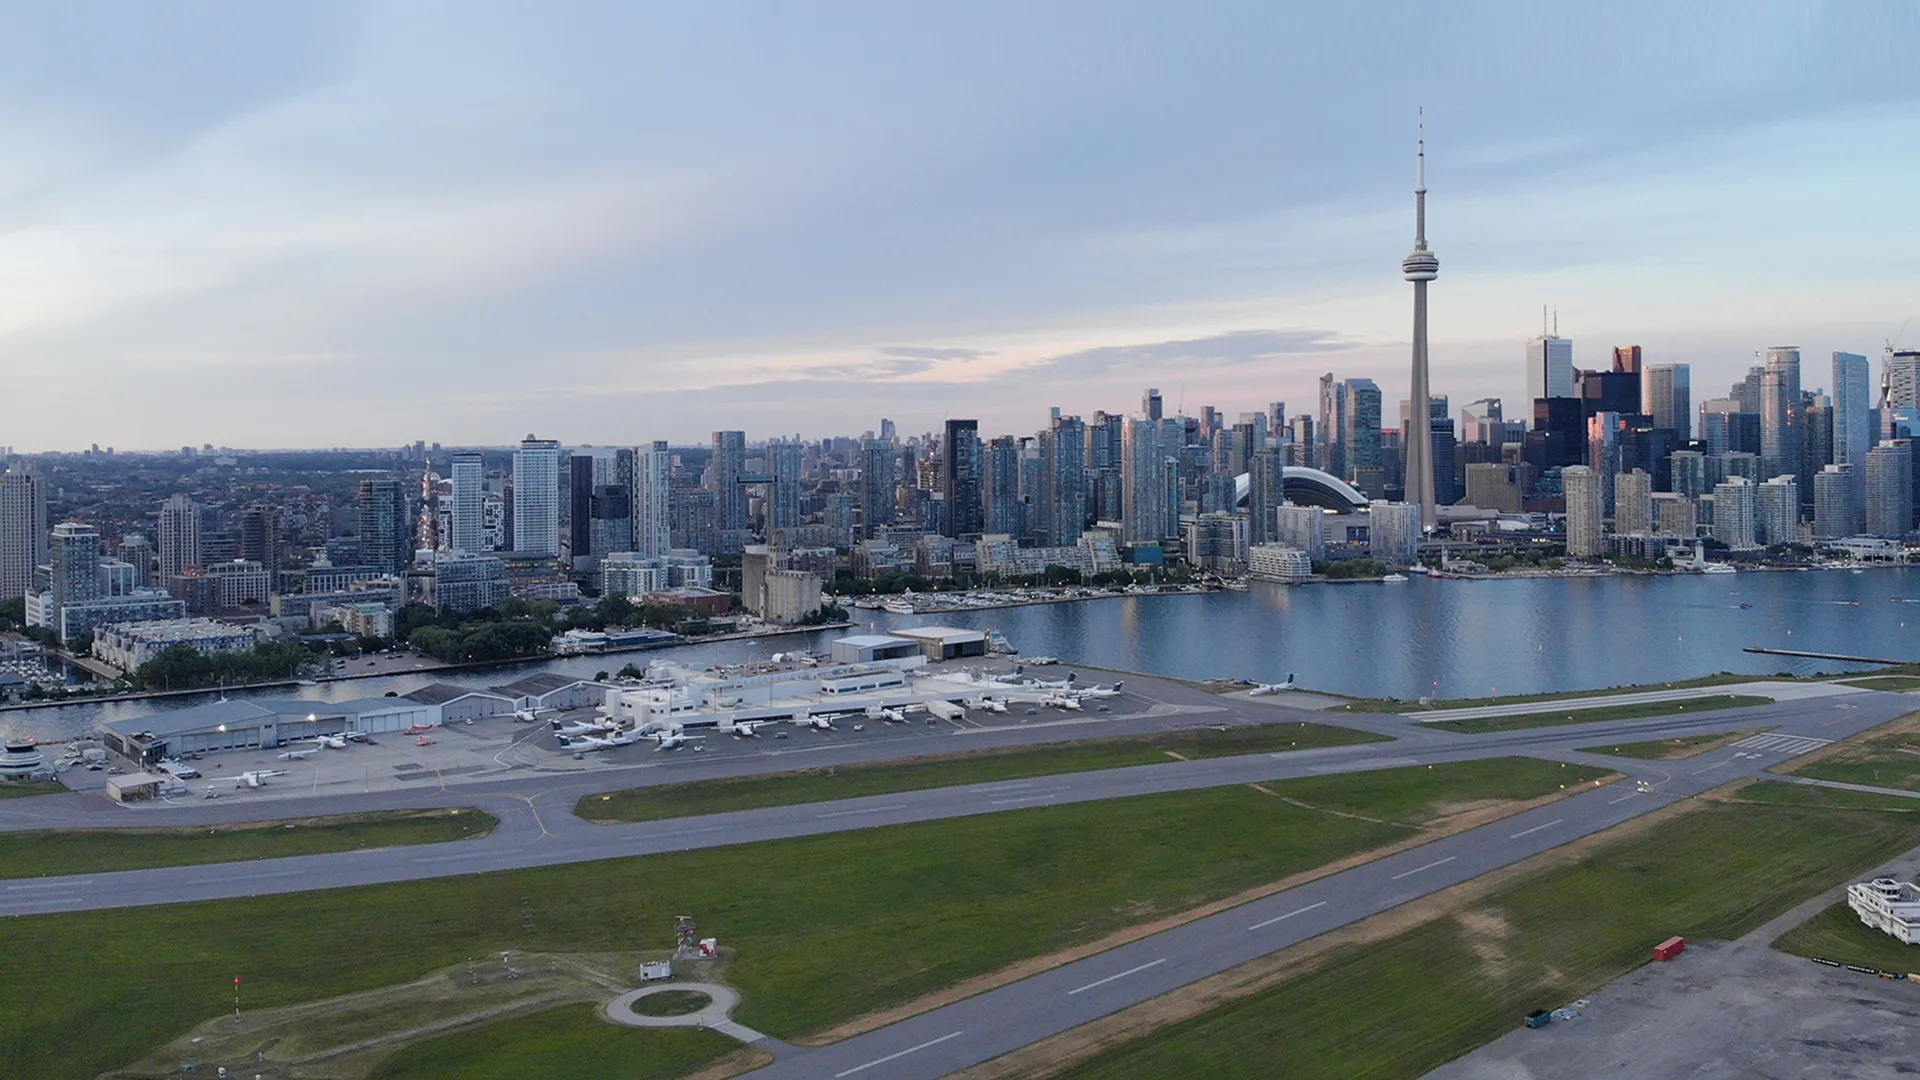 An aerial photo - Billy Bishop Toronto City Airport in foreground and the Toronto city skyline in the background.